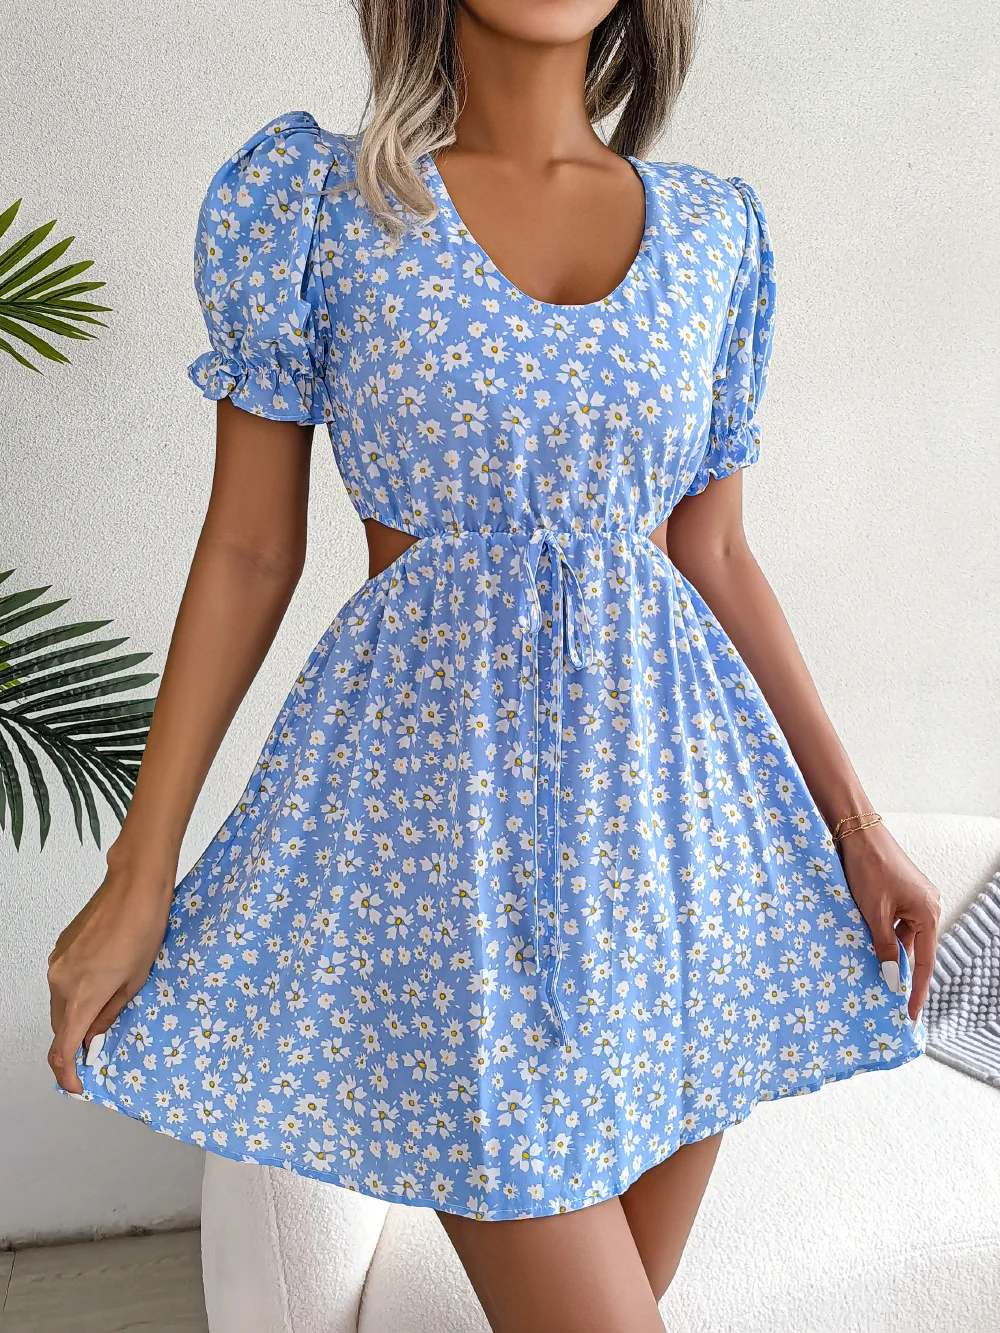 Elegant Floral Print Dress Women Summer Dresses New Casual Hollow Out Lace-up V-neck Short Puff Sleeve Mini Dress